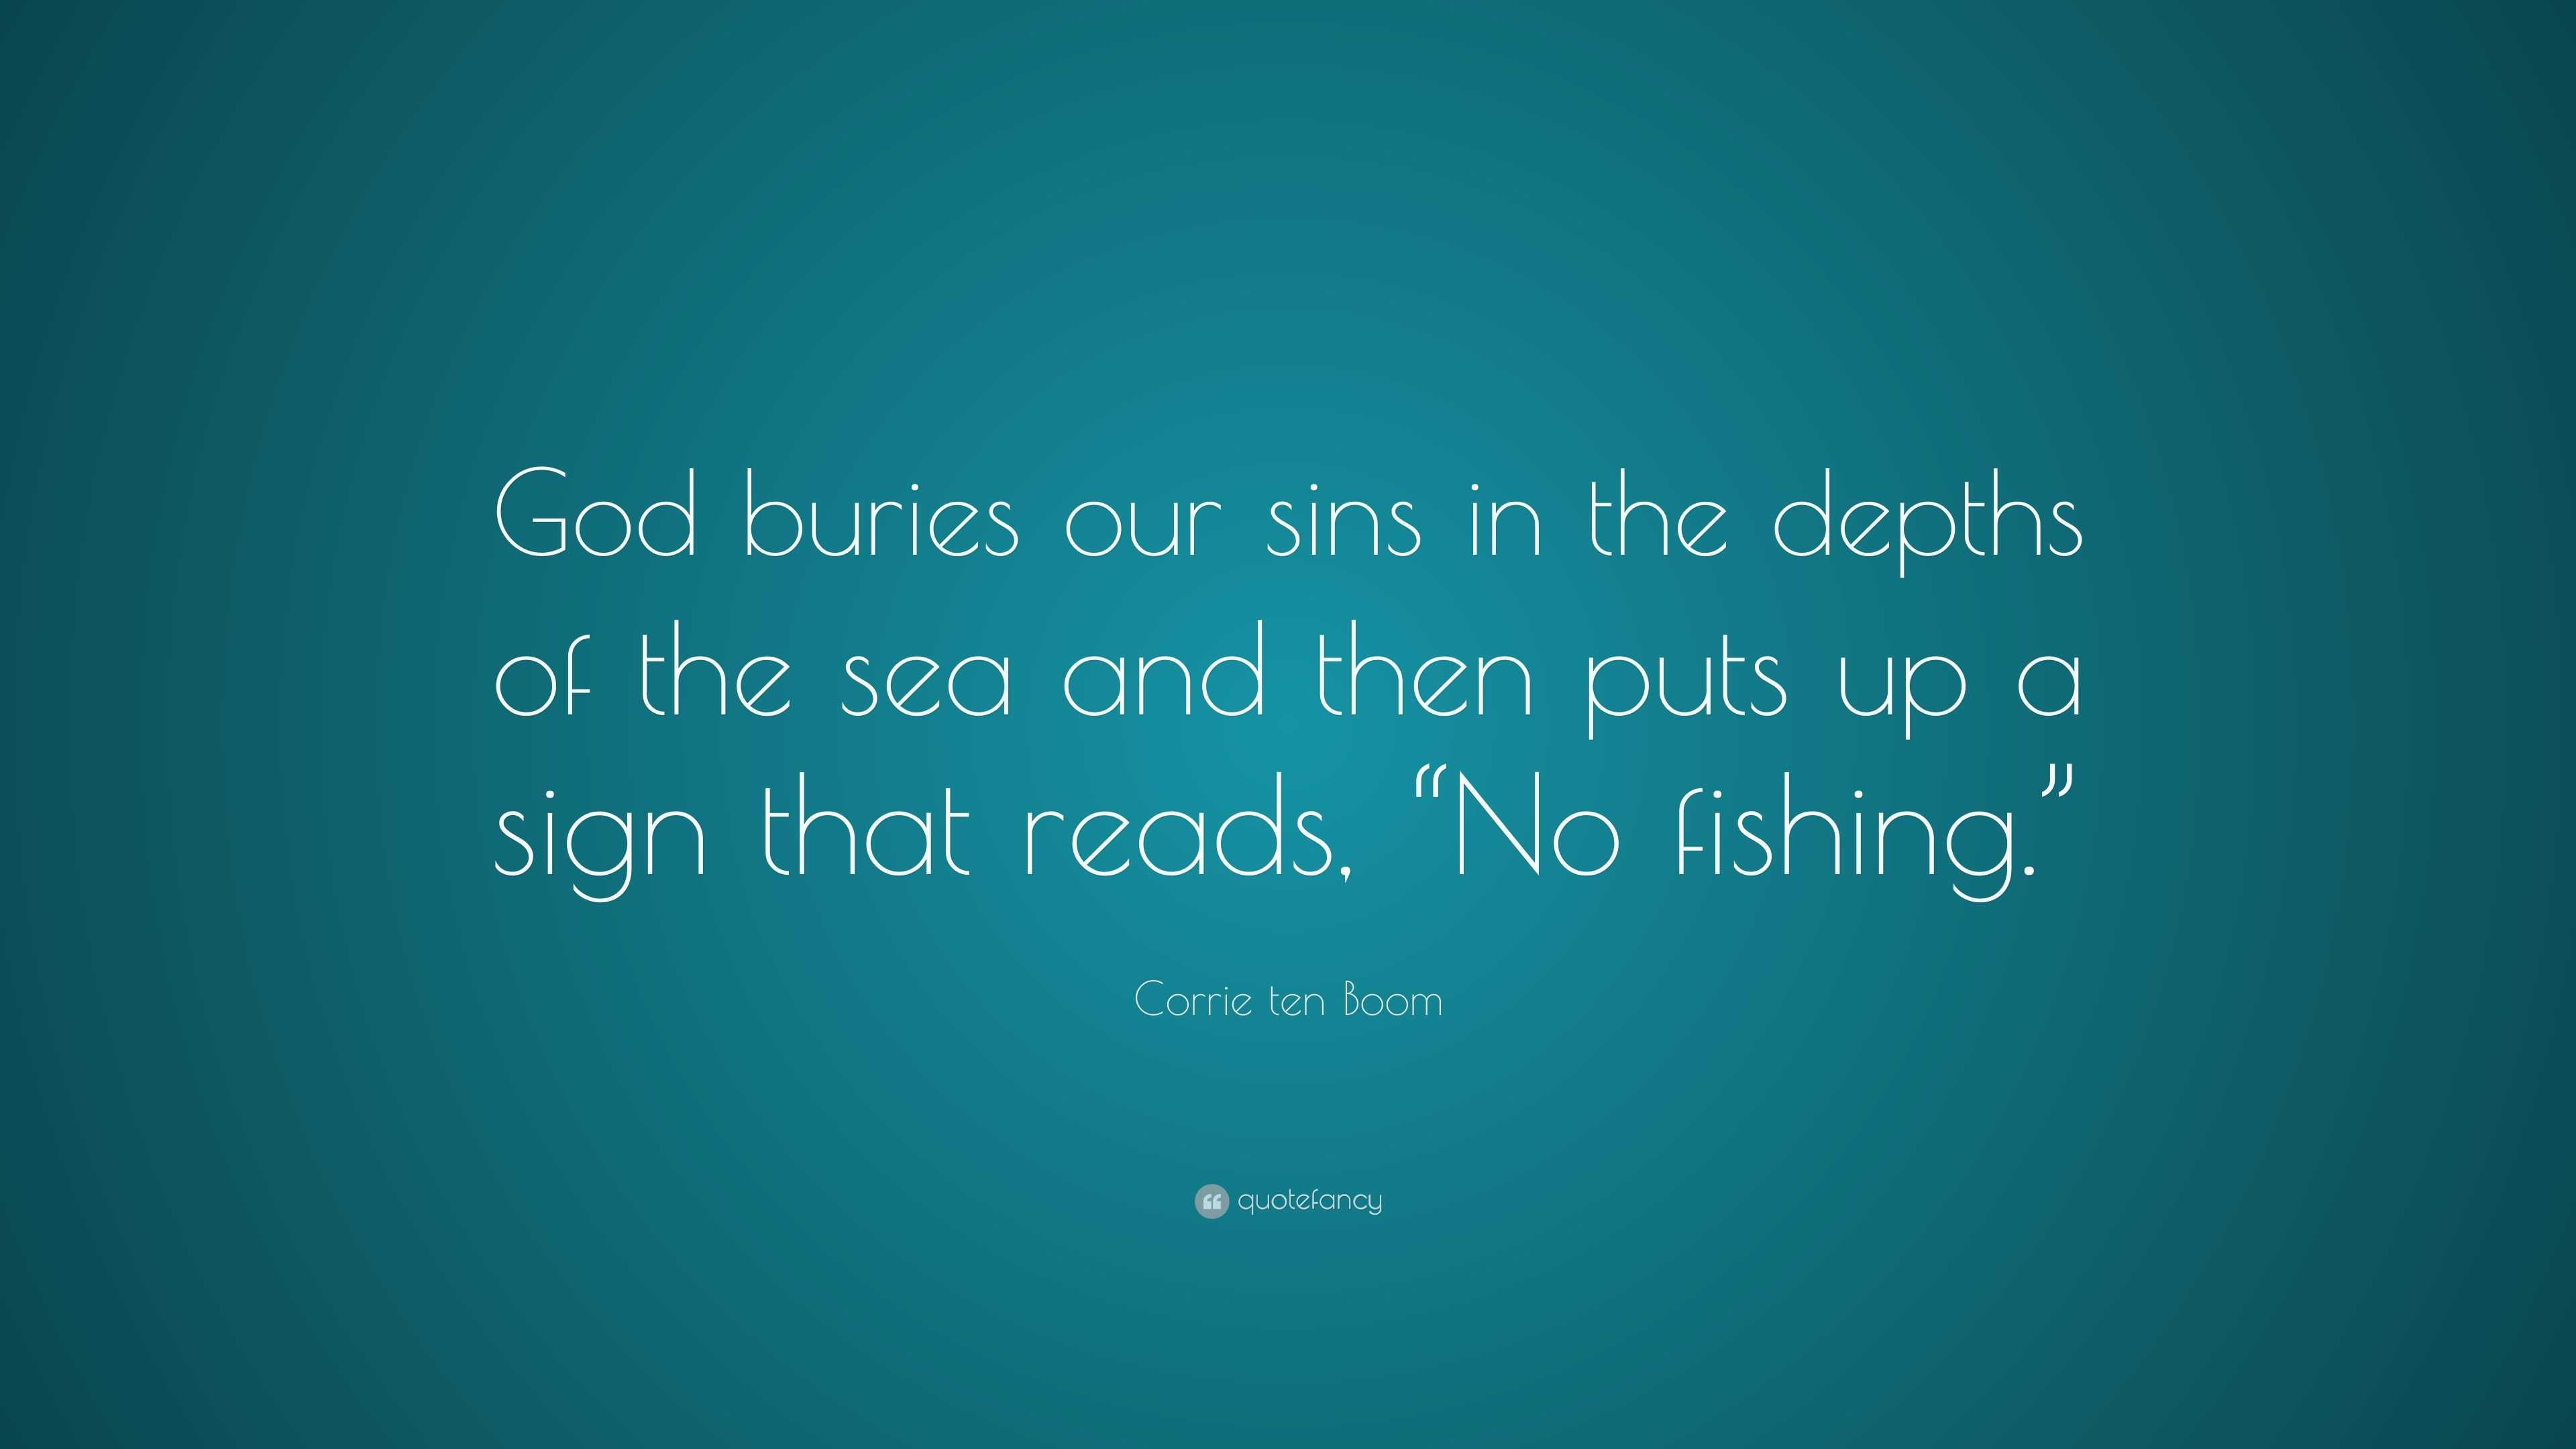 Corrie ten Boom Quote: “God buries our sins in the depths of the